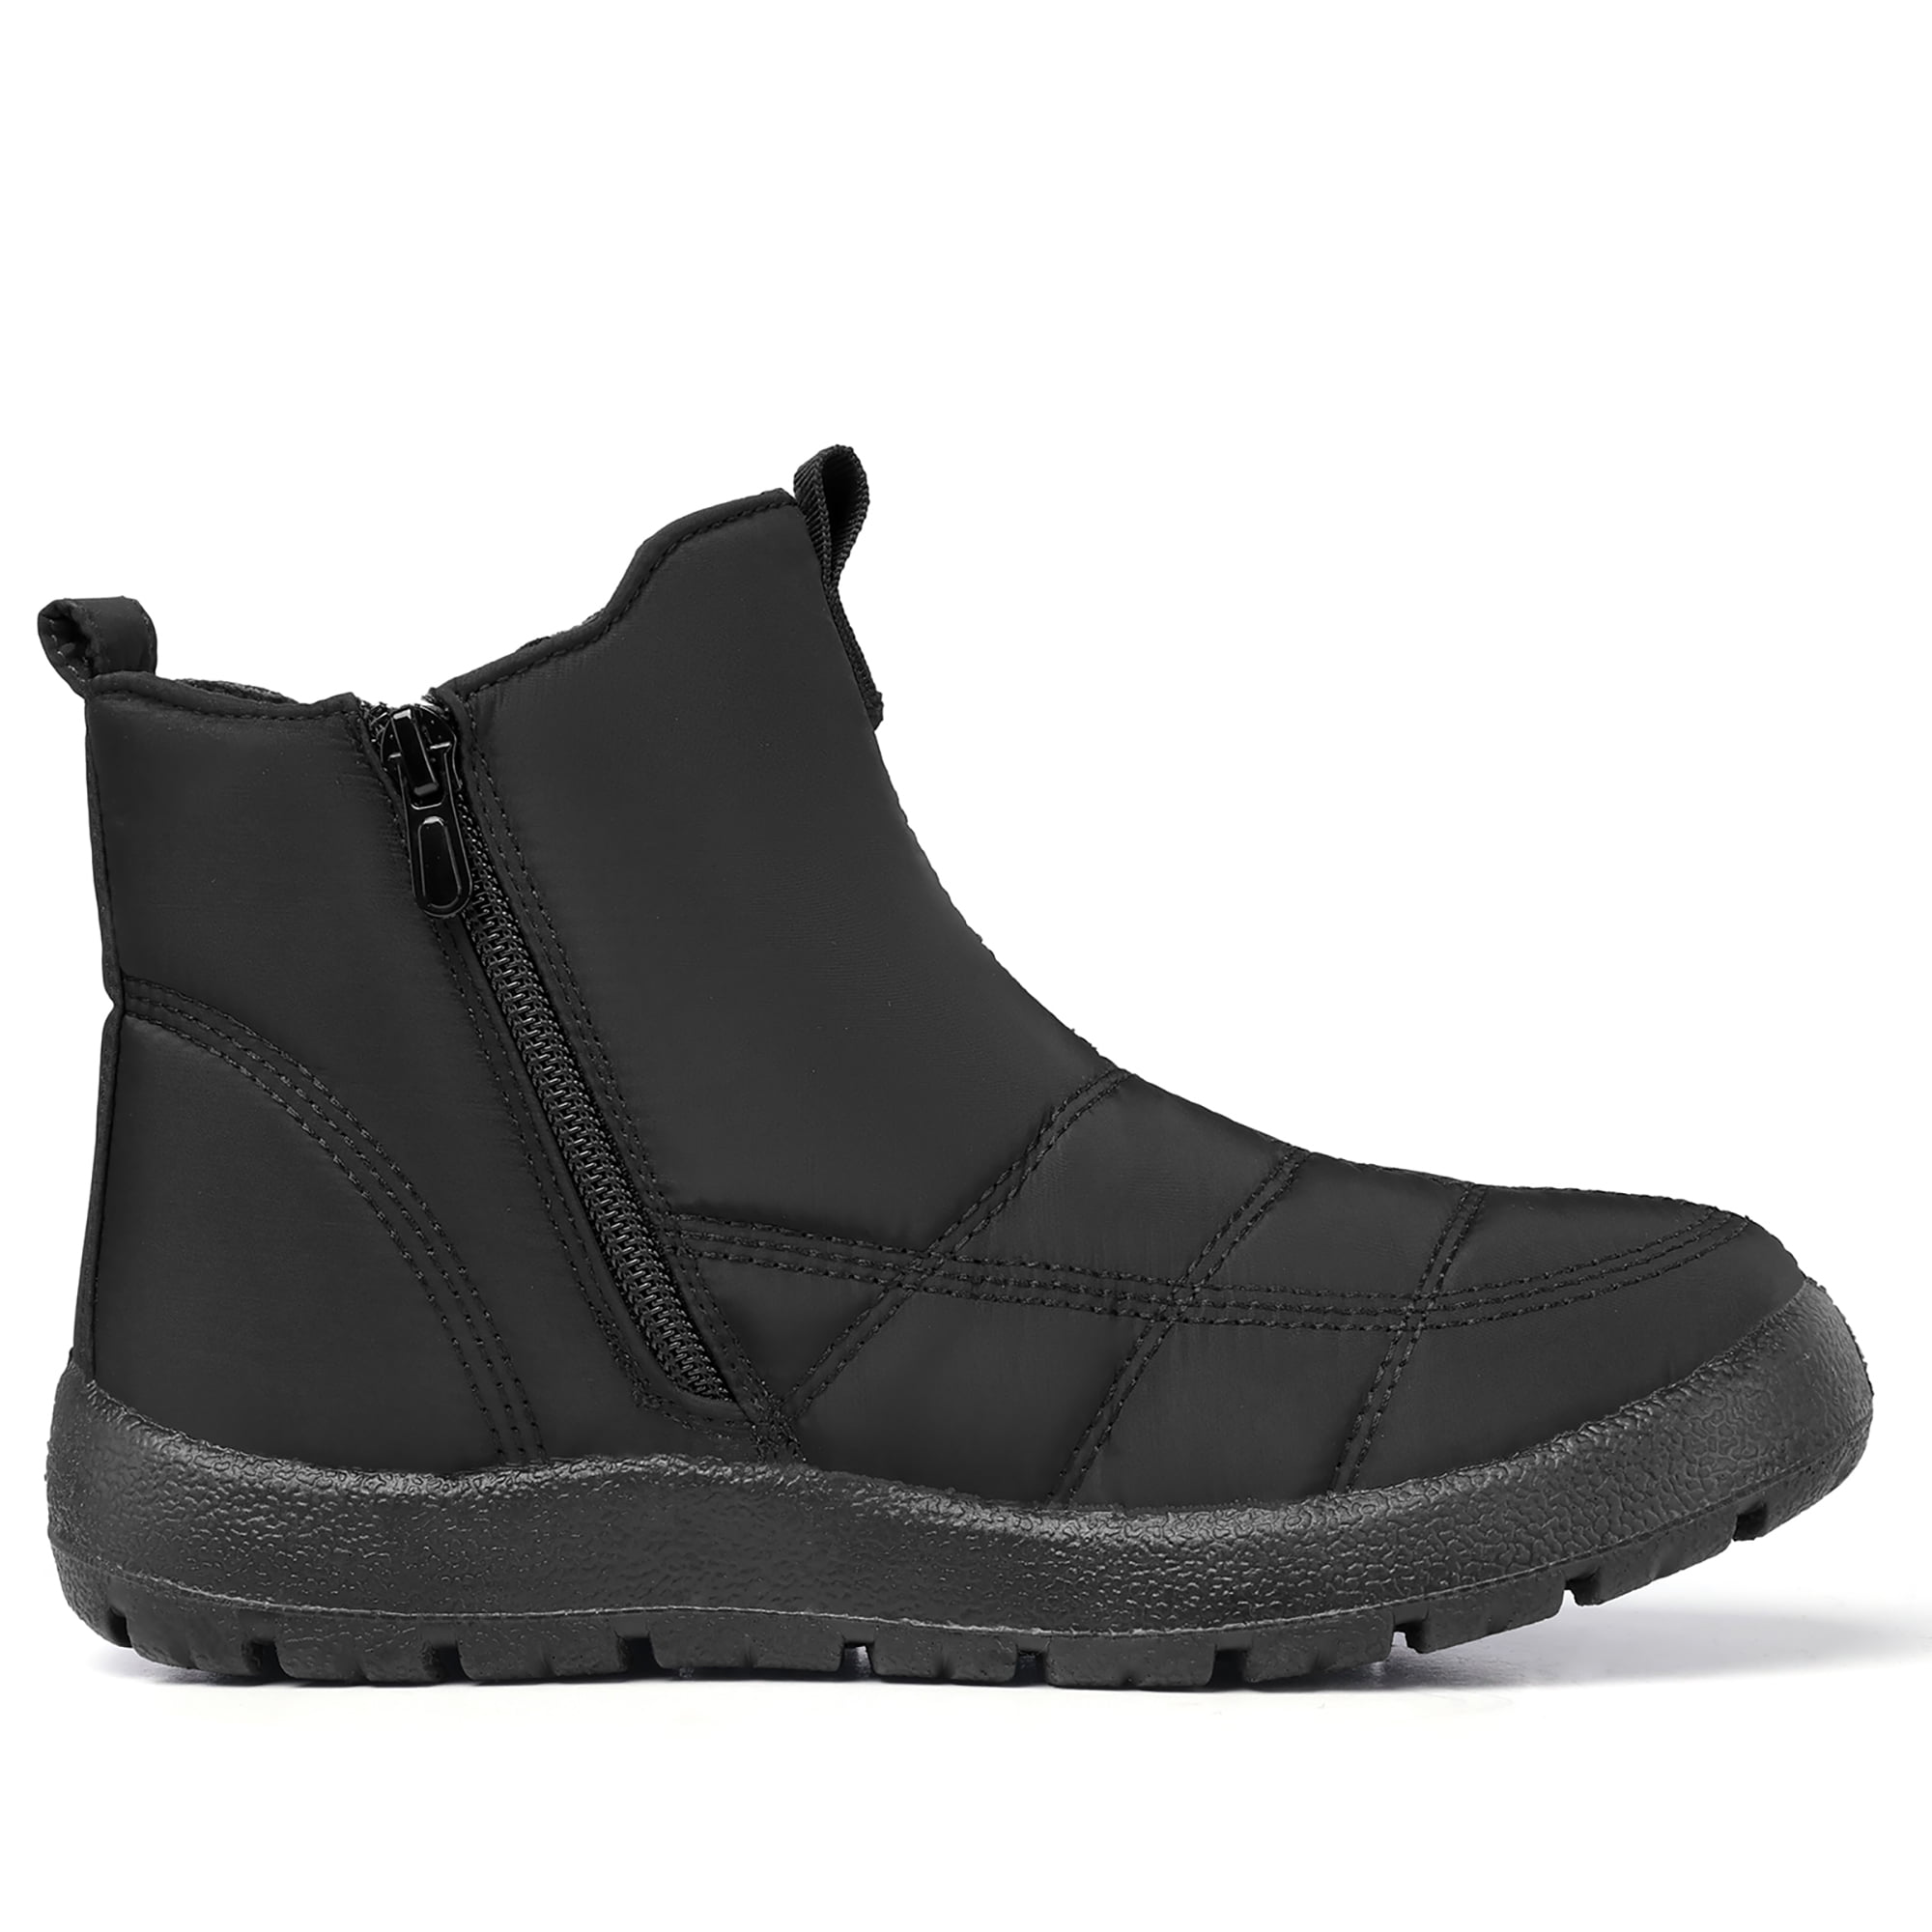 Boojoy Winter Shoes Boojoy Winter Snow Ankle Boots Warm Fur Lined Slip On  Waterproof (44 Black)